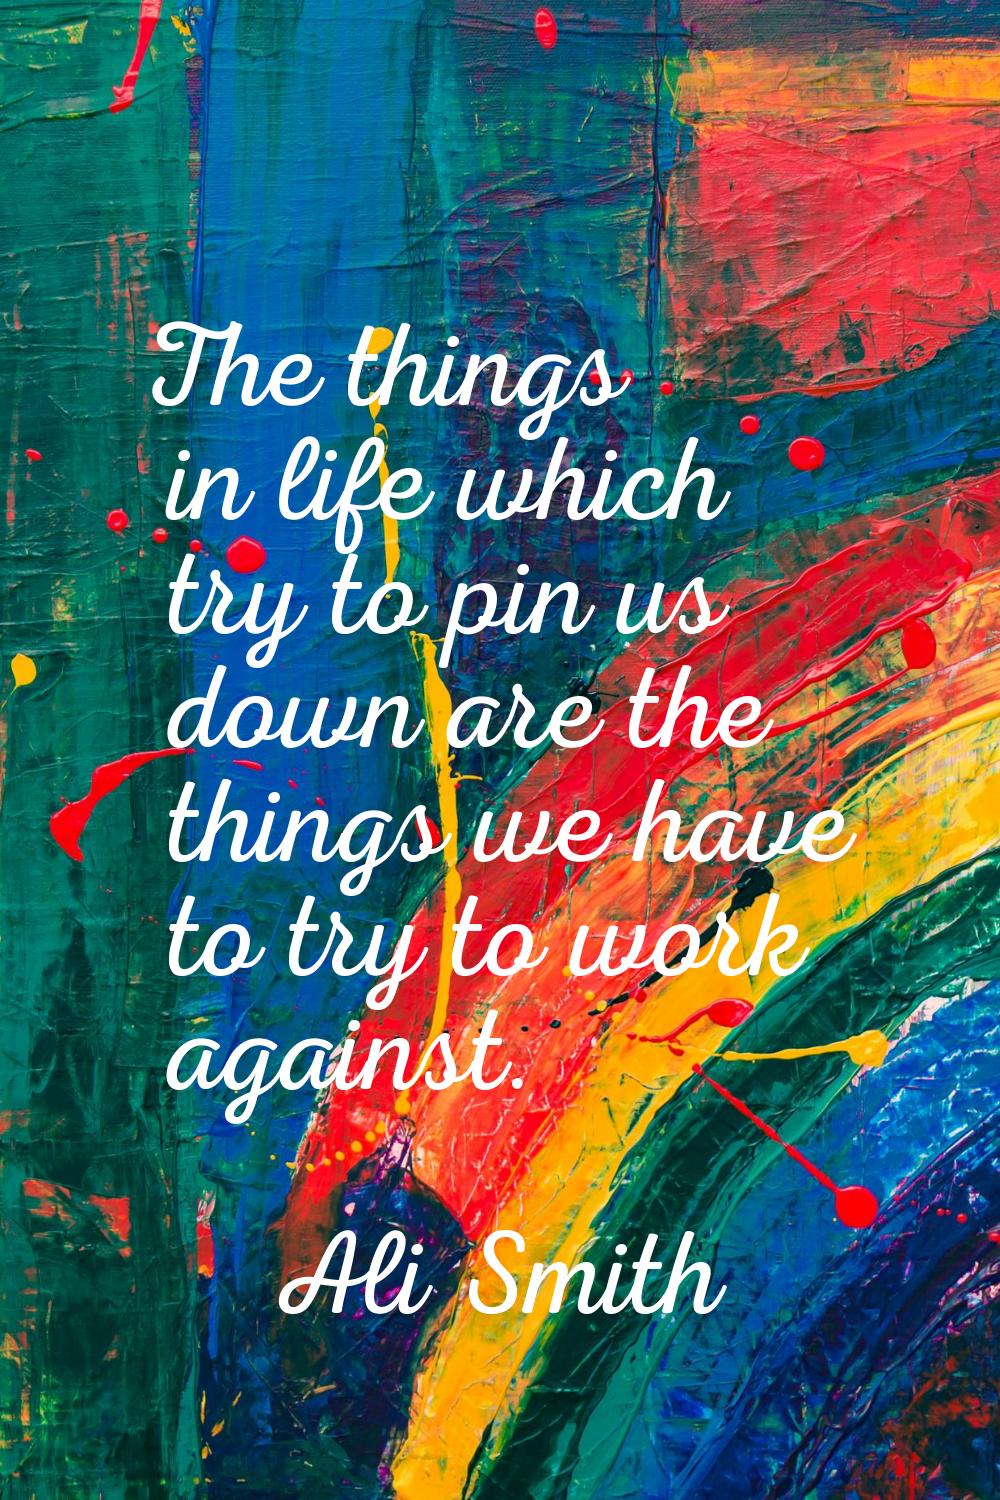 The things in life which try to pin us down are the things we have to try to work against.